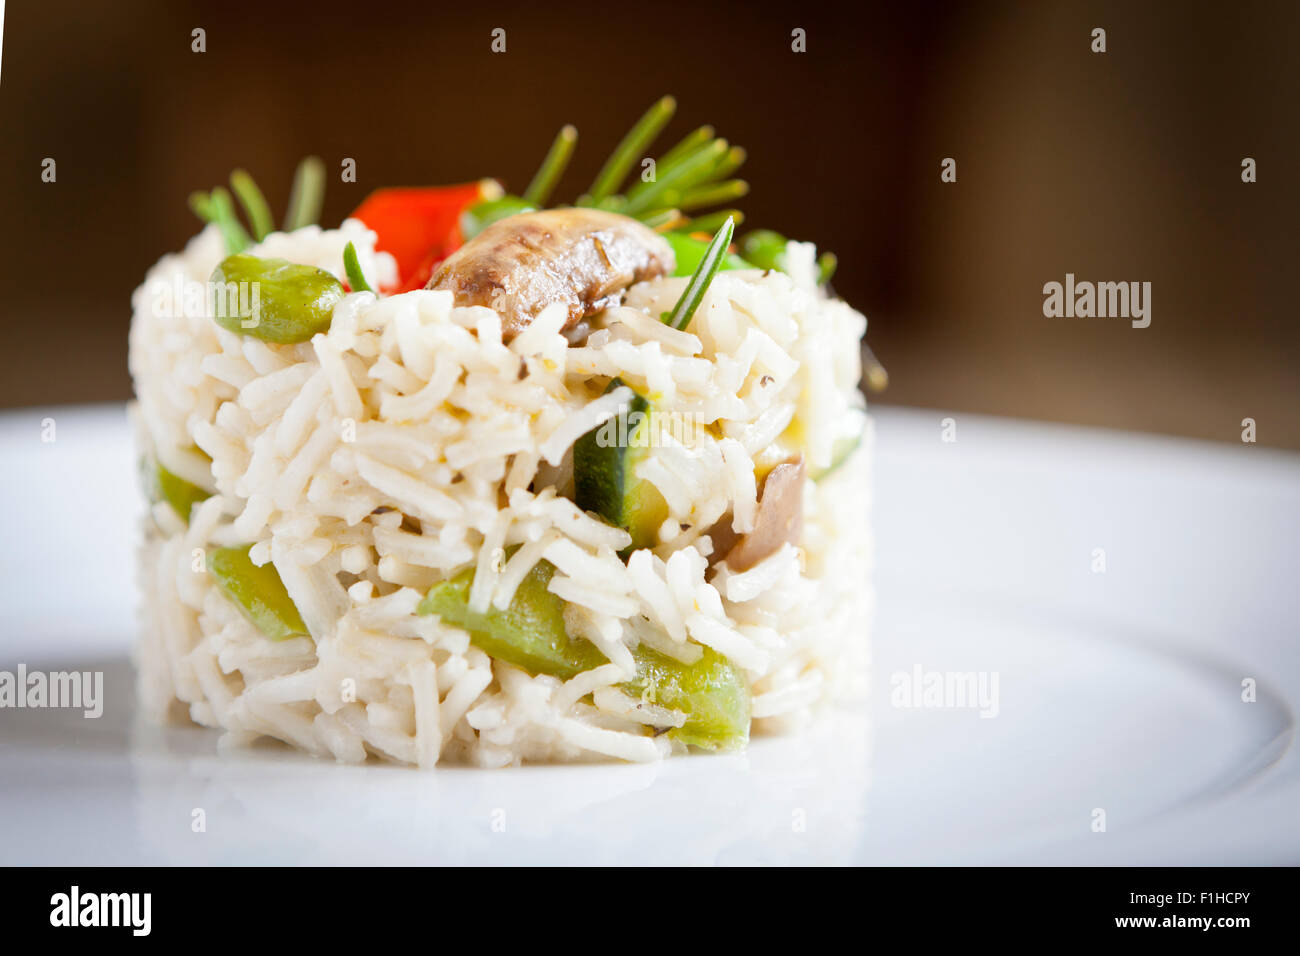 Tamboril rice with vegetables on a plate Stock Photo